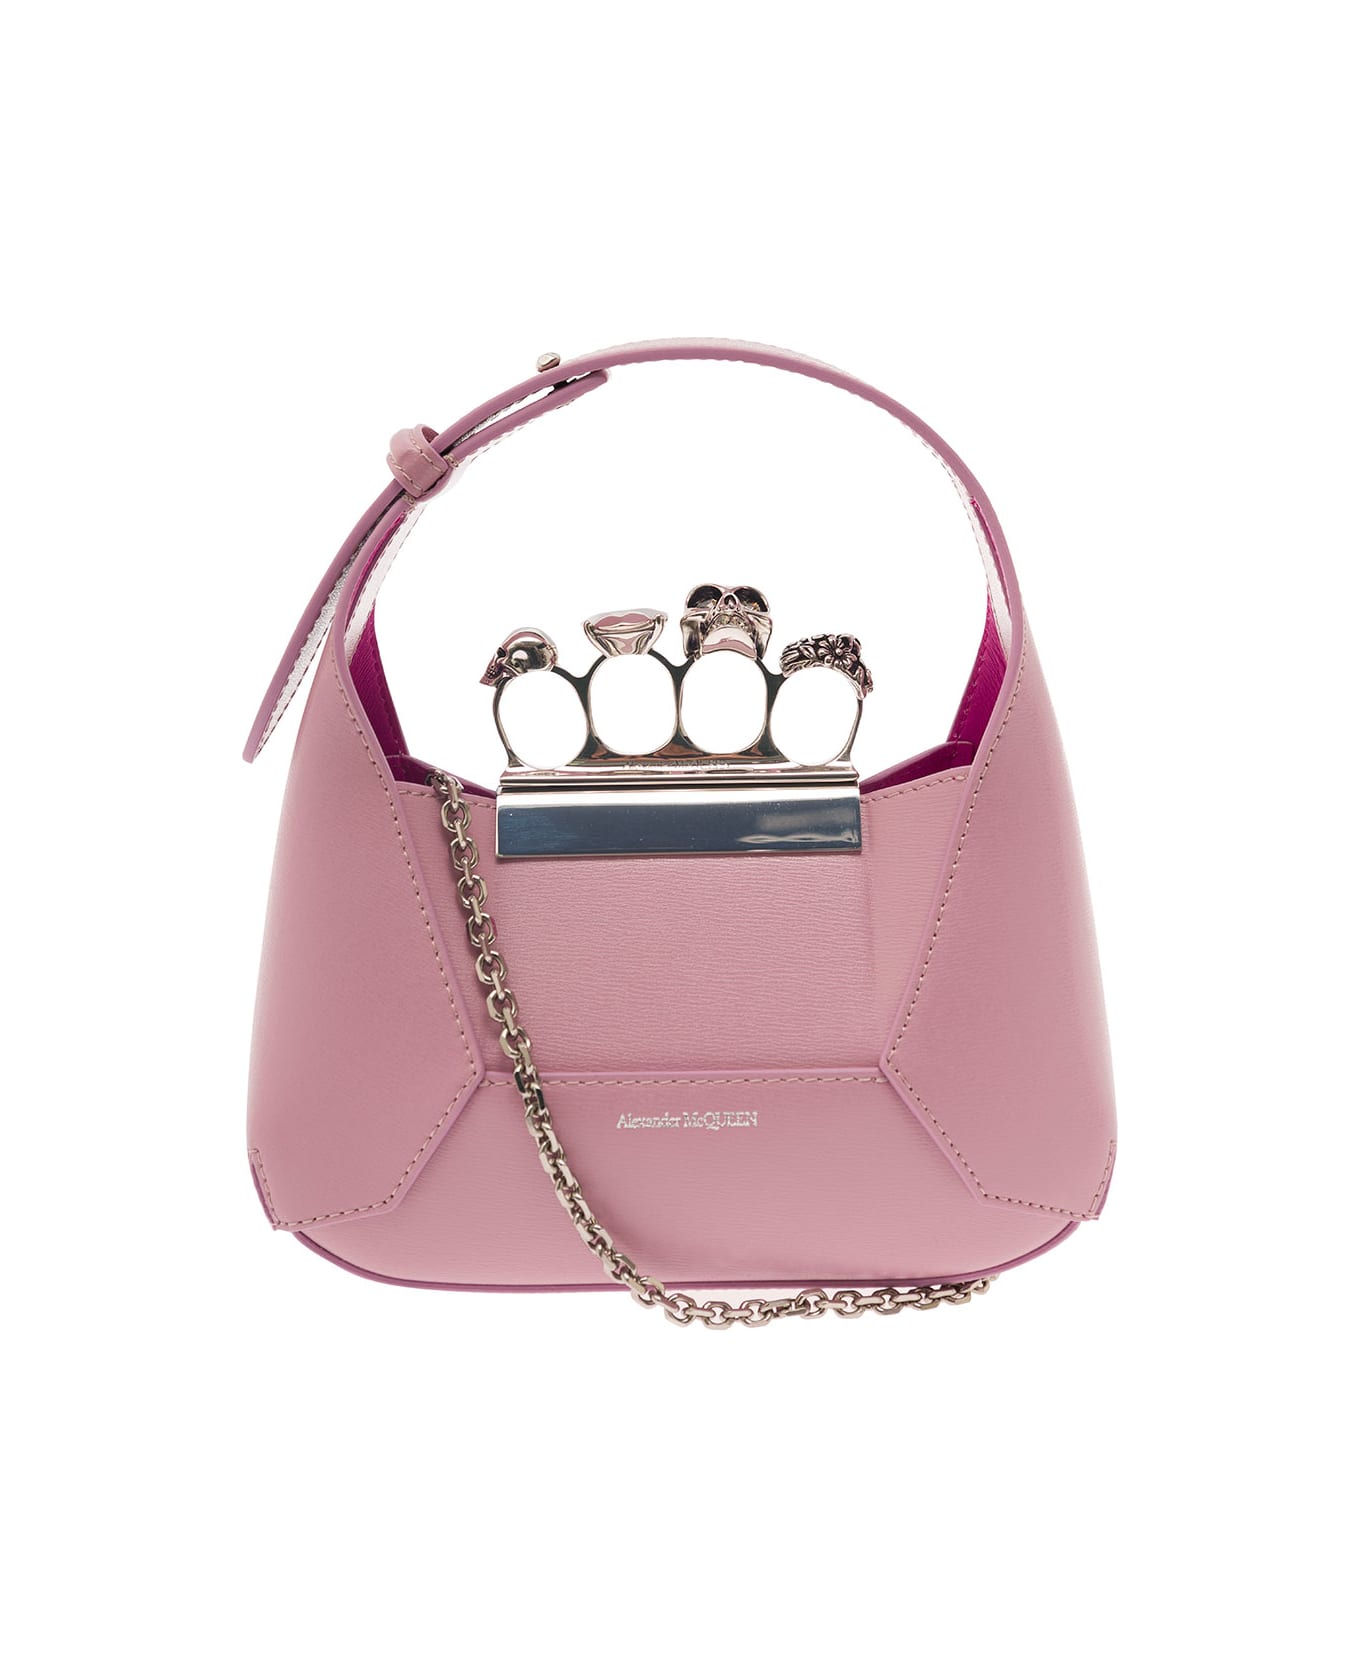 Alexander McQueen 'jewelled' Pink Hobo Bag With Four Rings Detail And Chain In Leather Woman - Pink